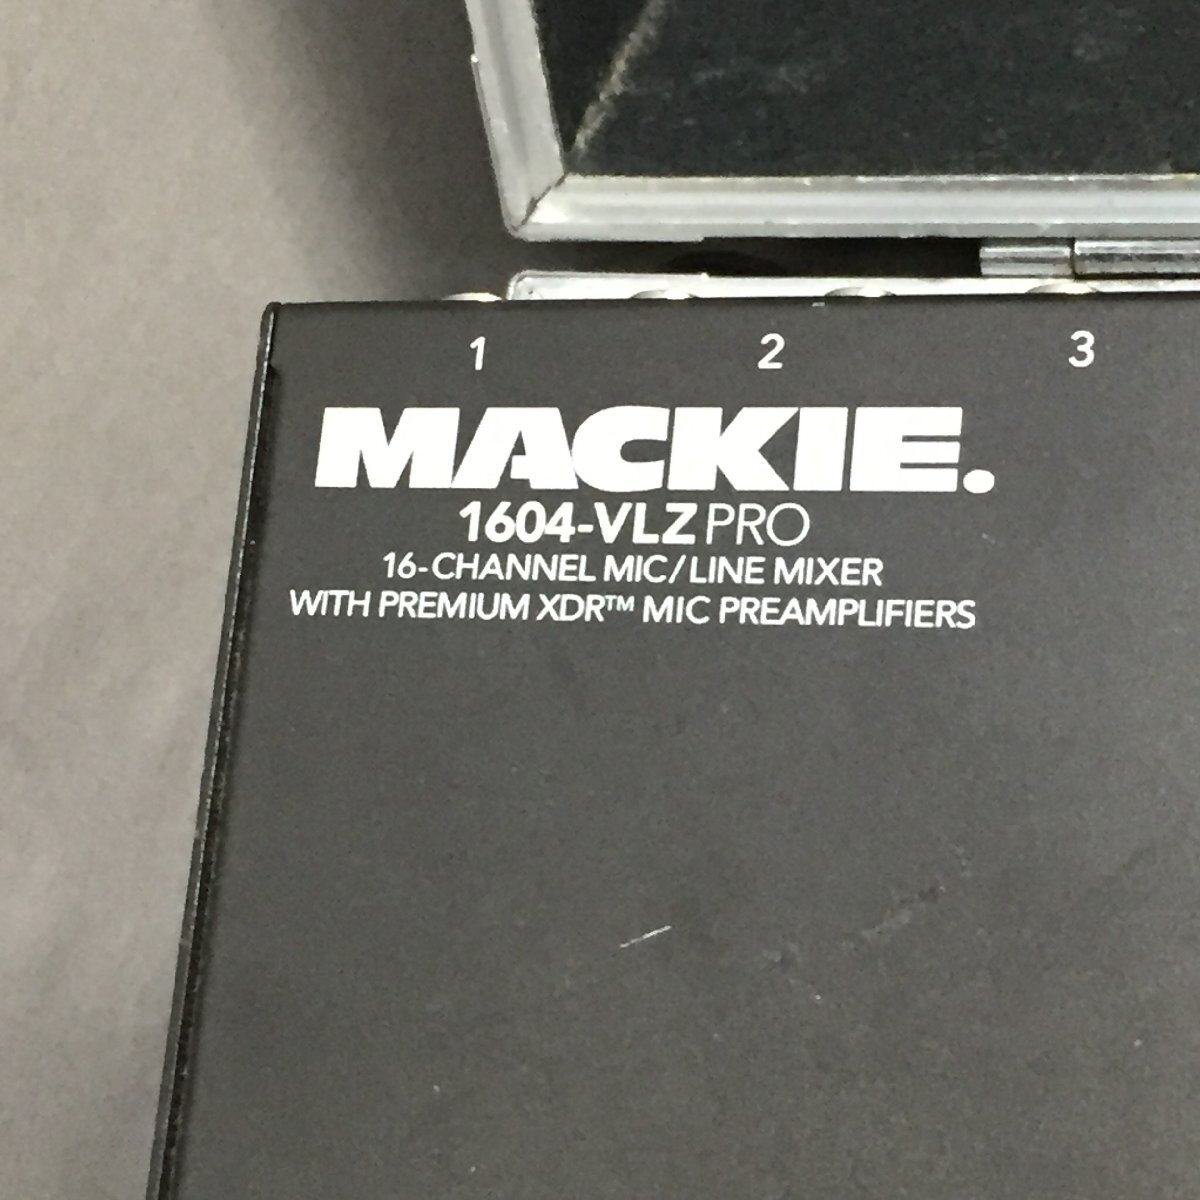 f146*160 [ present condition goods ] MACKIE 1604-VLZ PRO Mackie analog mixer hard case attaching 